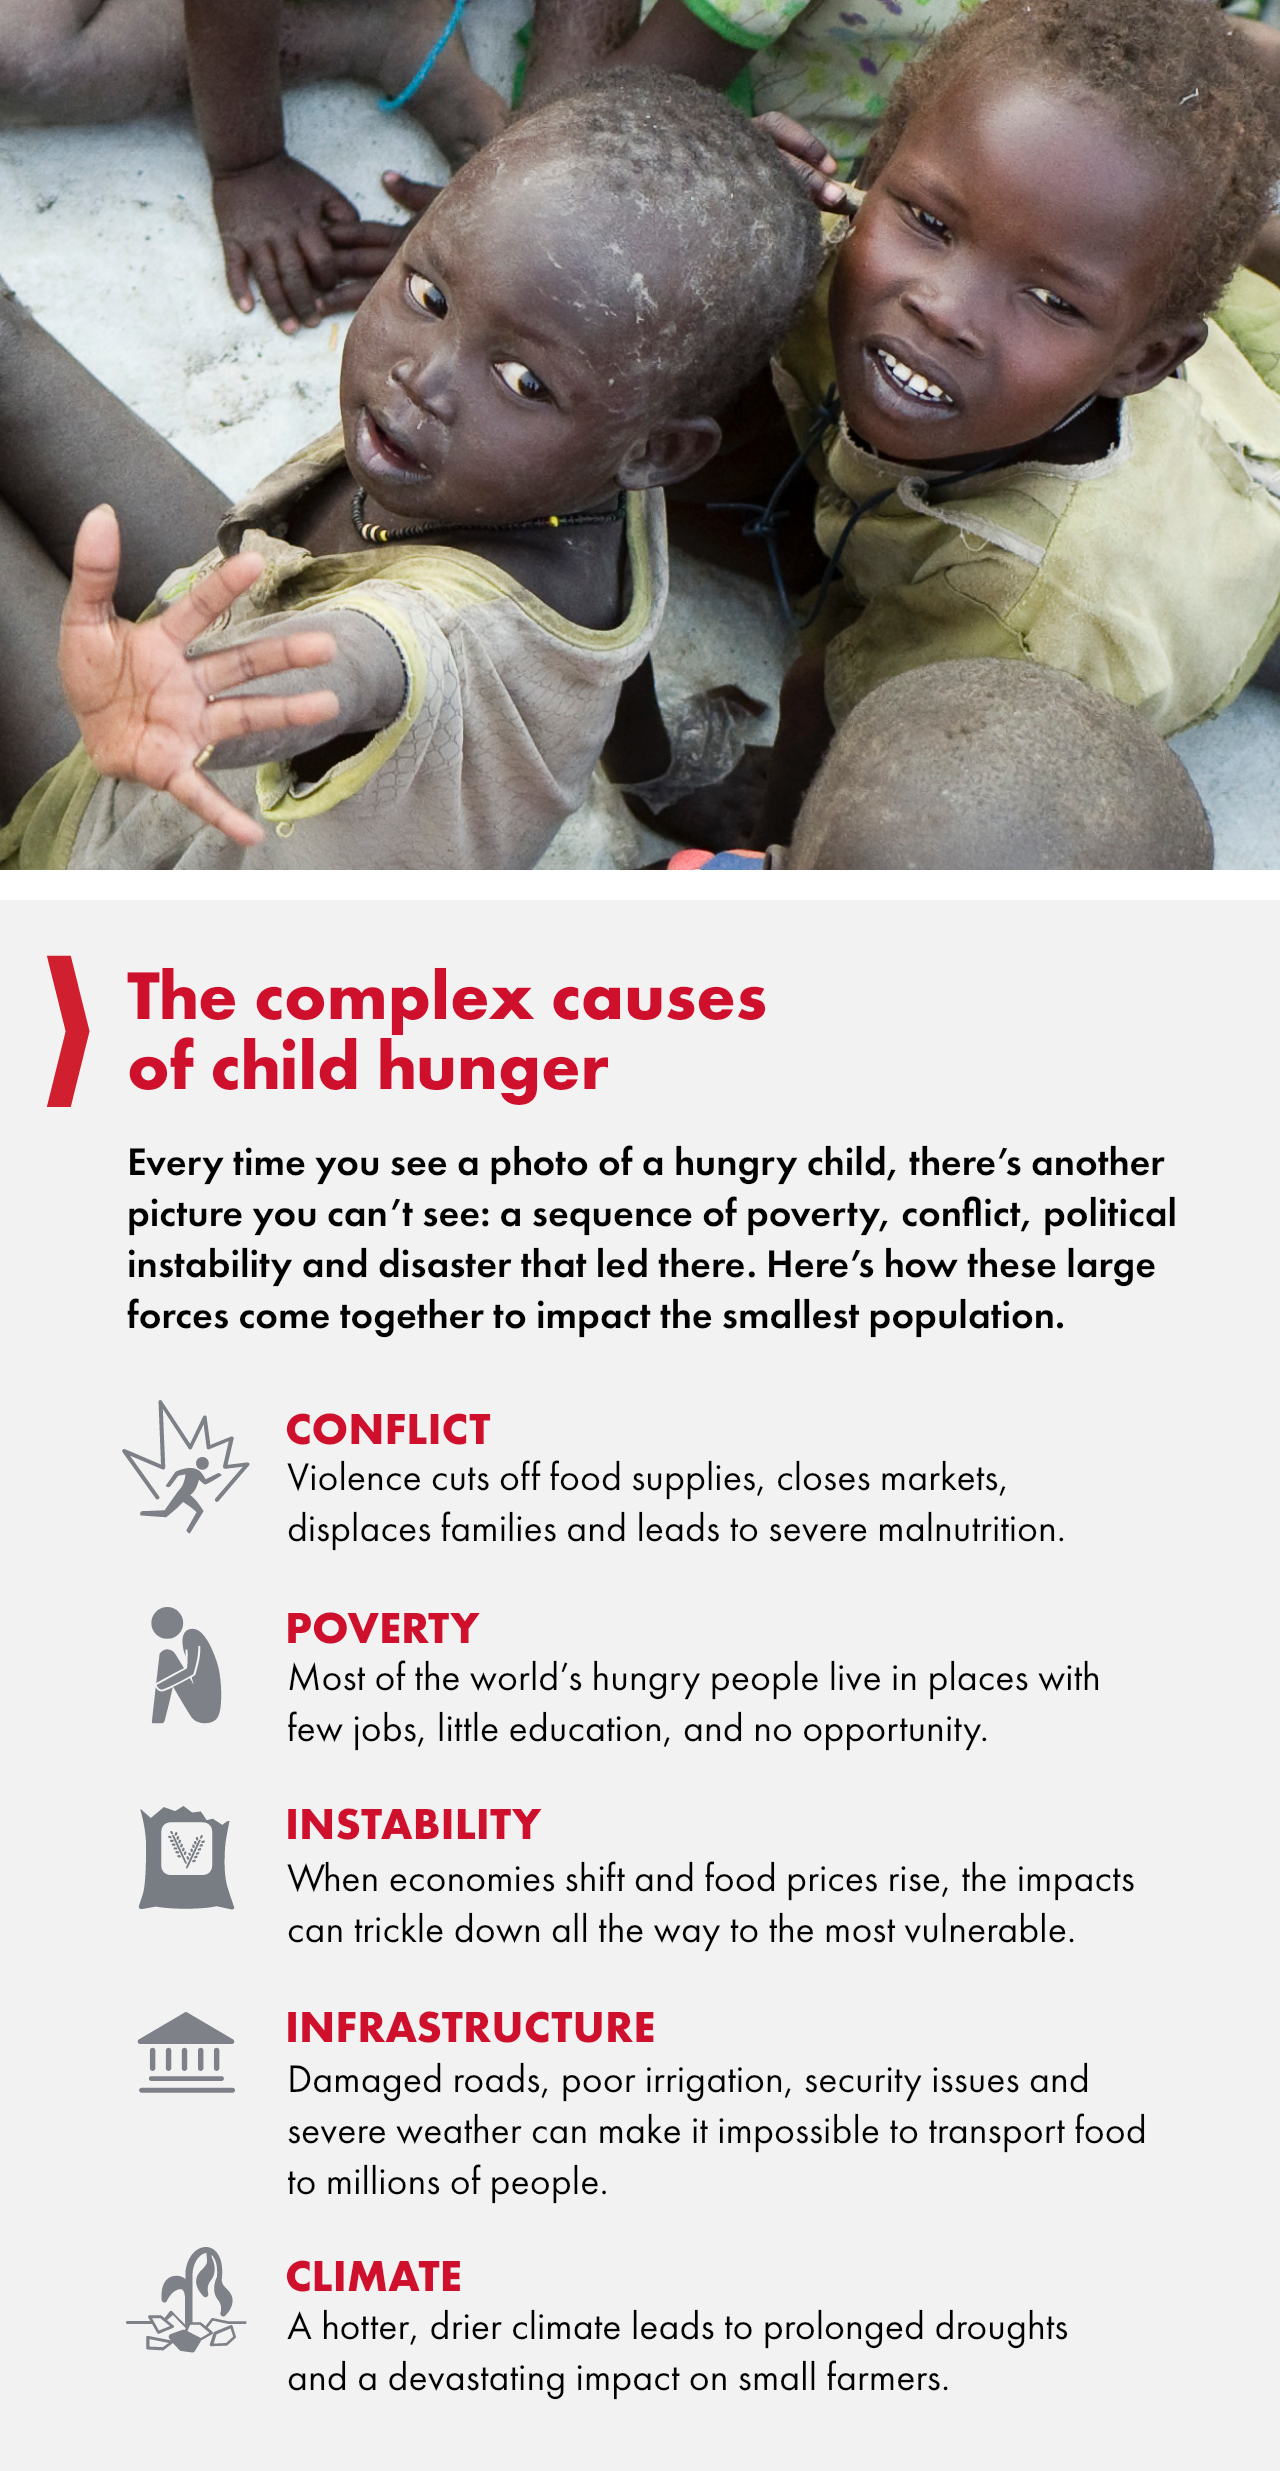 The complex causes of child hunger: conflict, poverty, instability, infrastructure, climate